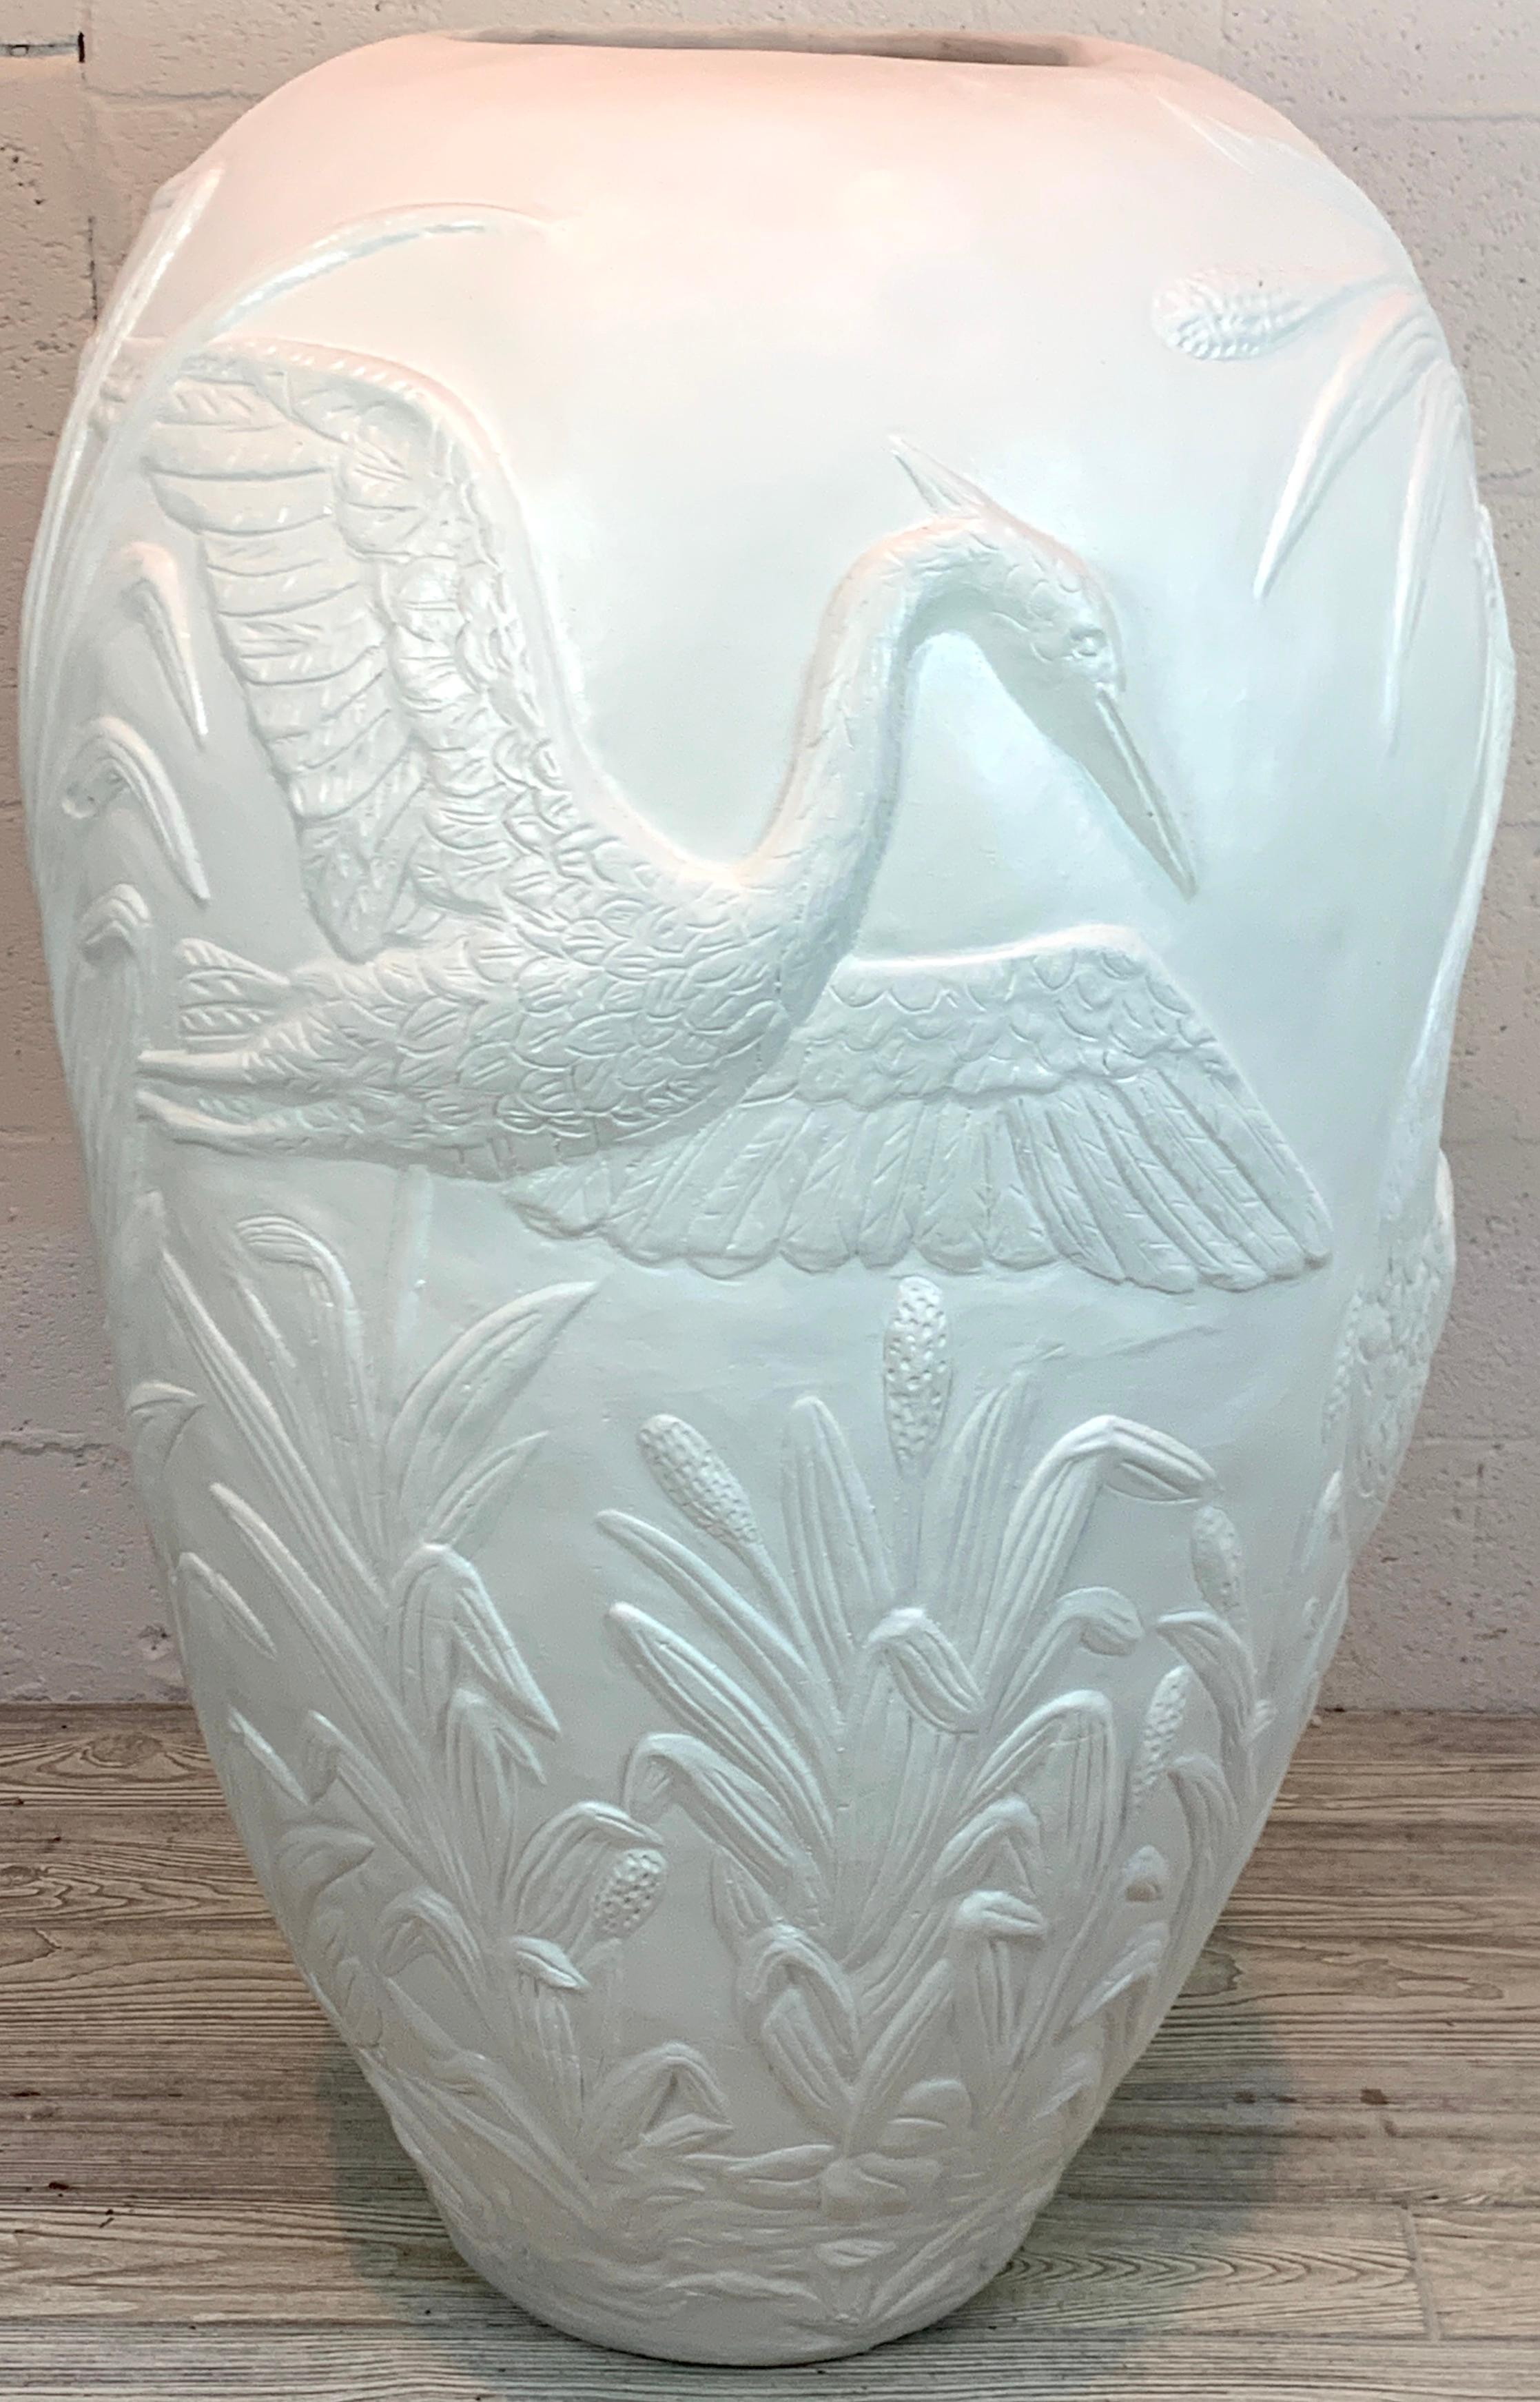 Monumental Florida modern heron vase, circa 1980, with three different detailed vignettes of Herons in naturalistic landscapes. Handmade of spun fiberglass, composition, plaster and lacquer. Standing 45 inches high, with a 25 inch diameter and a 10